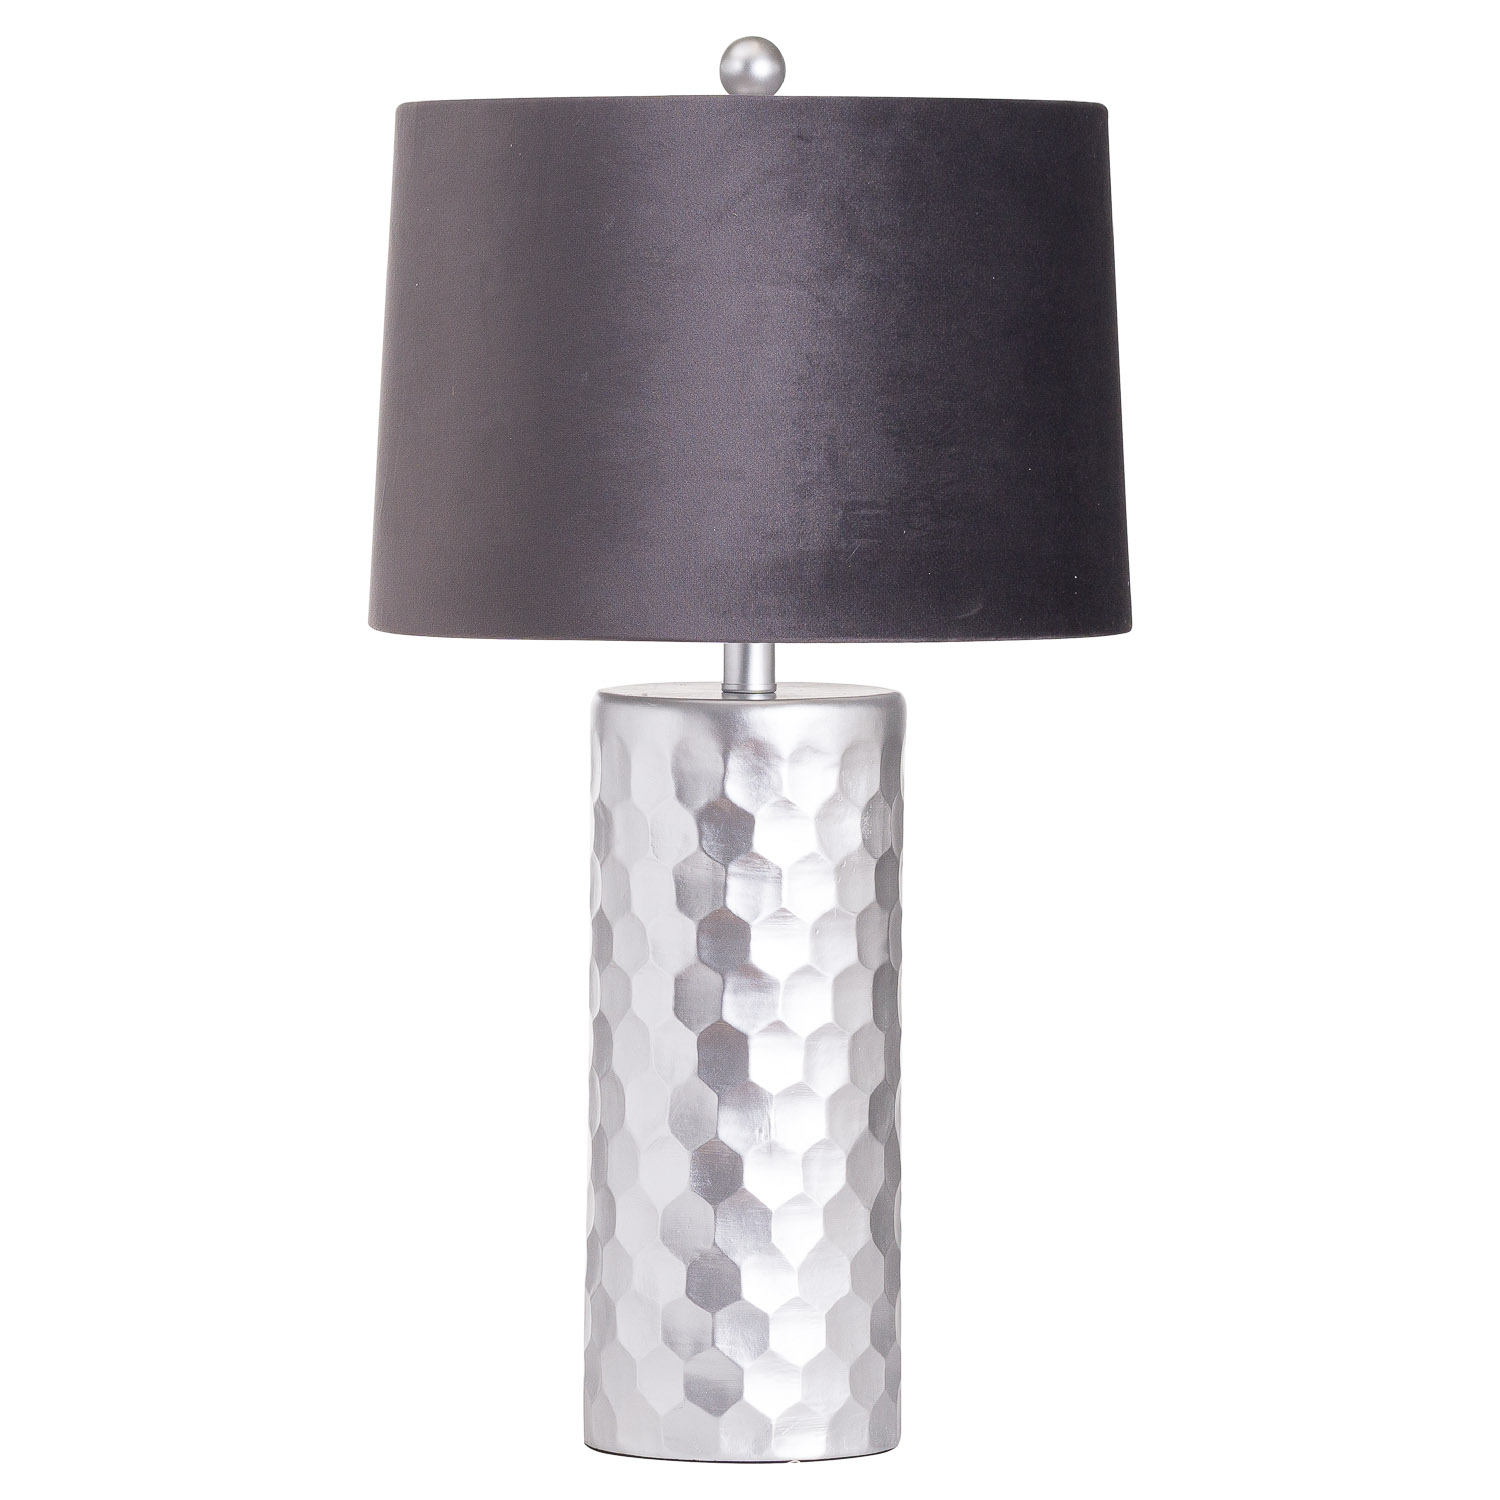 Honey Comb Silver Table Lamp With Grey Velvet Shade - Image 1